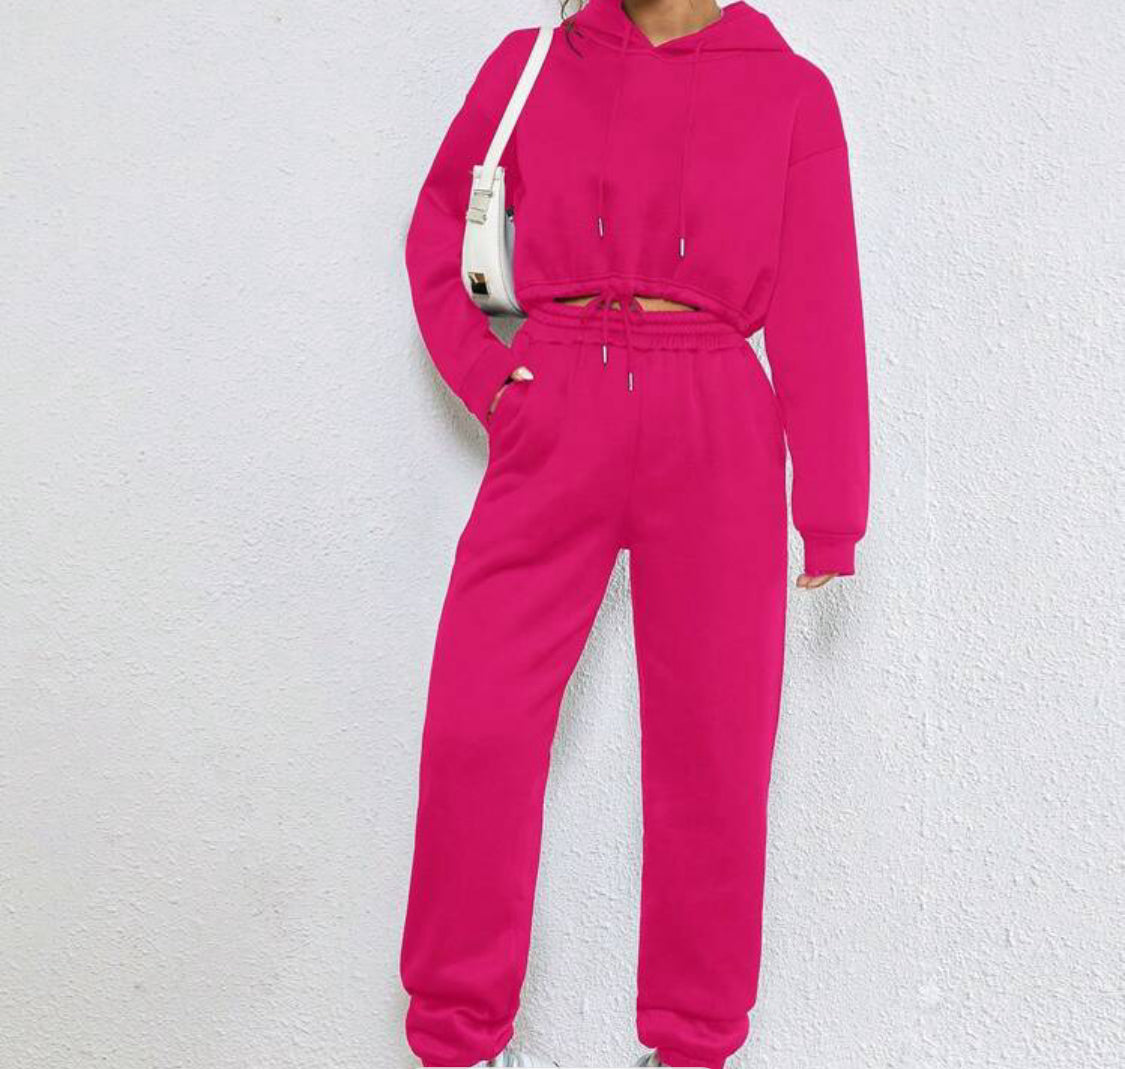 “They Just Don’t Know” Sweatsuit